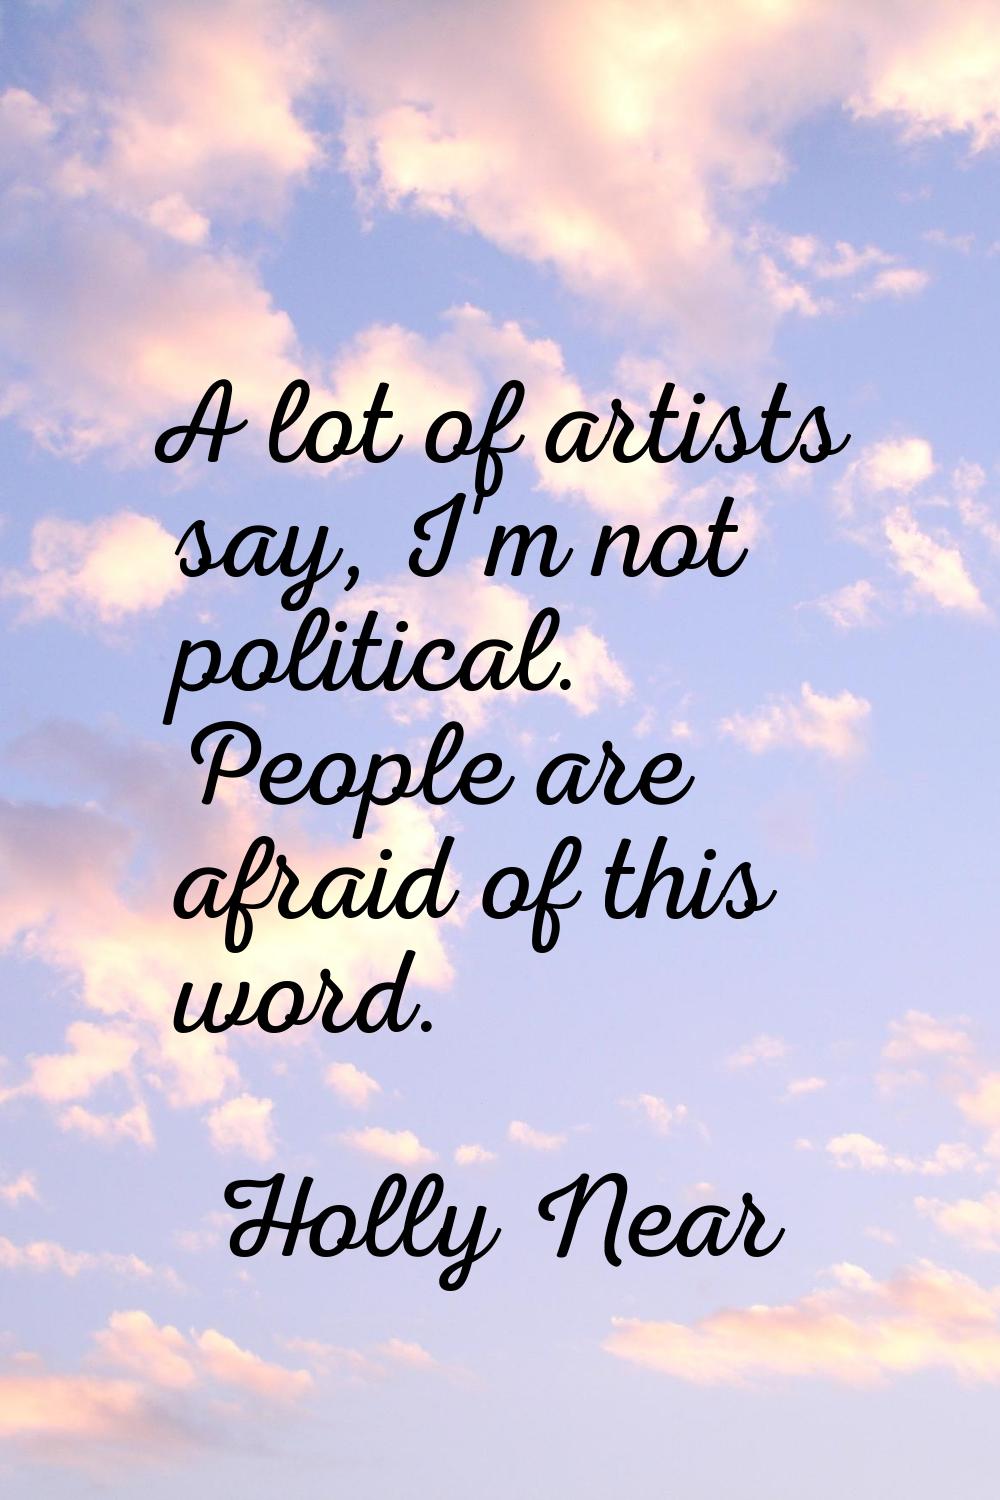 A lot of artists say, I'm not political. People are afraid of this word.